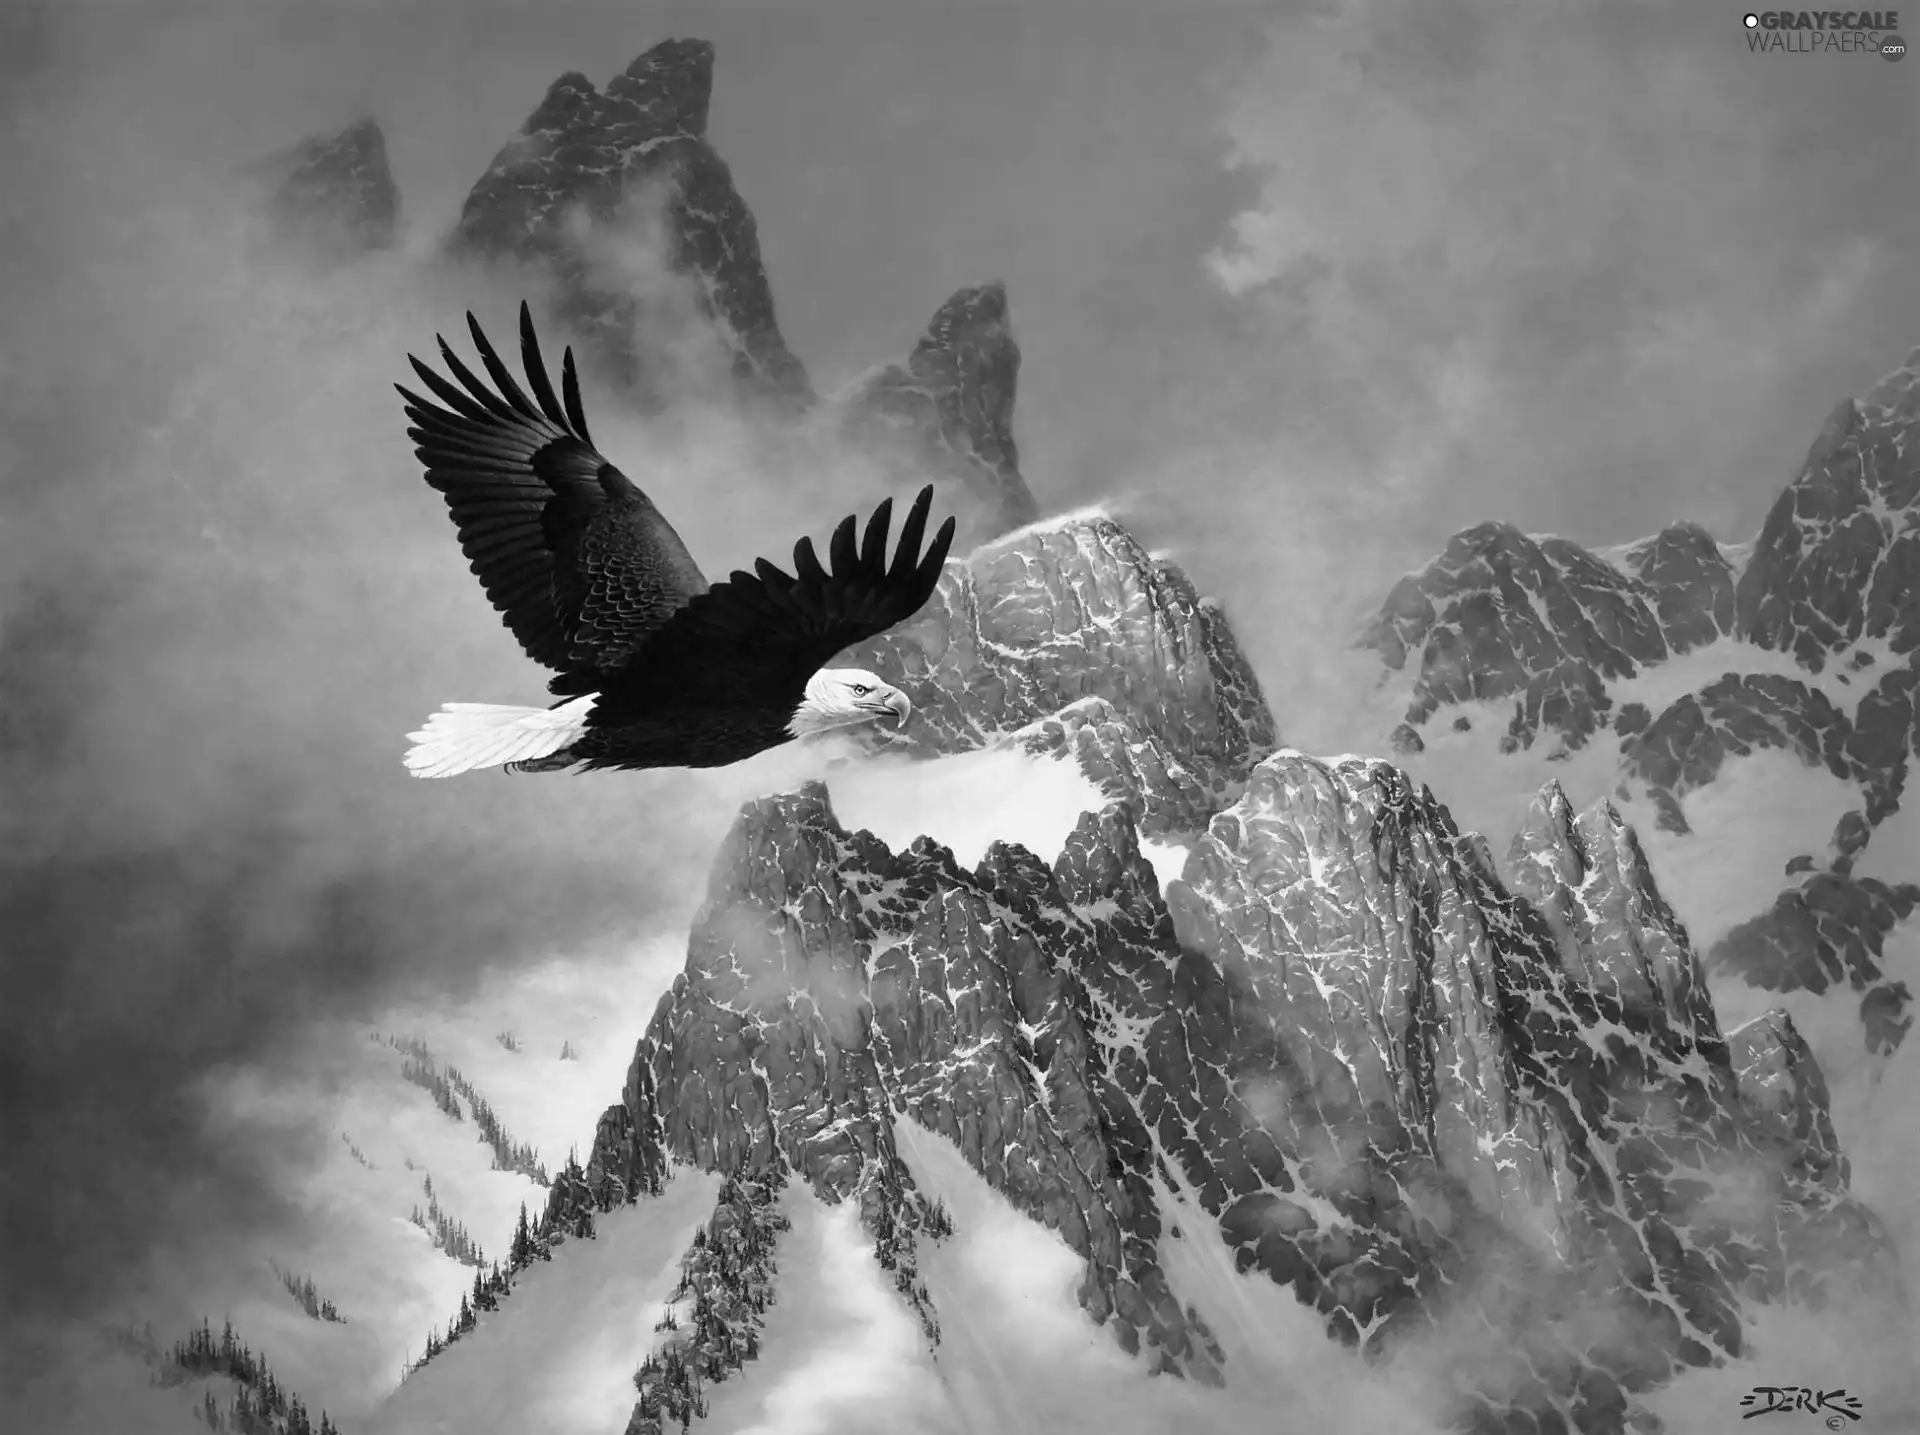 American Bald Eagle, winter, painting, Mountains